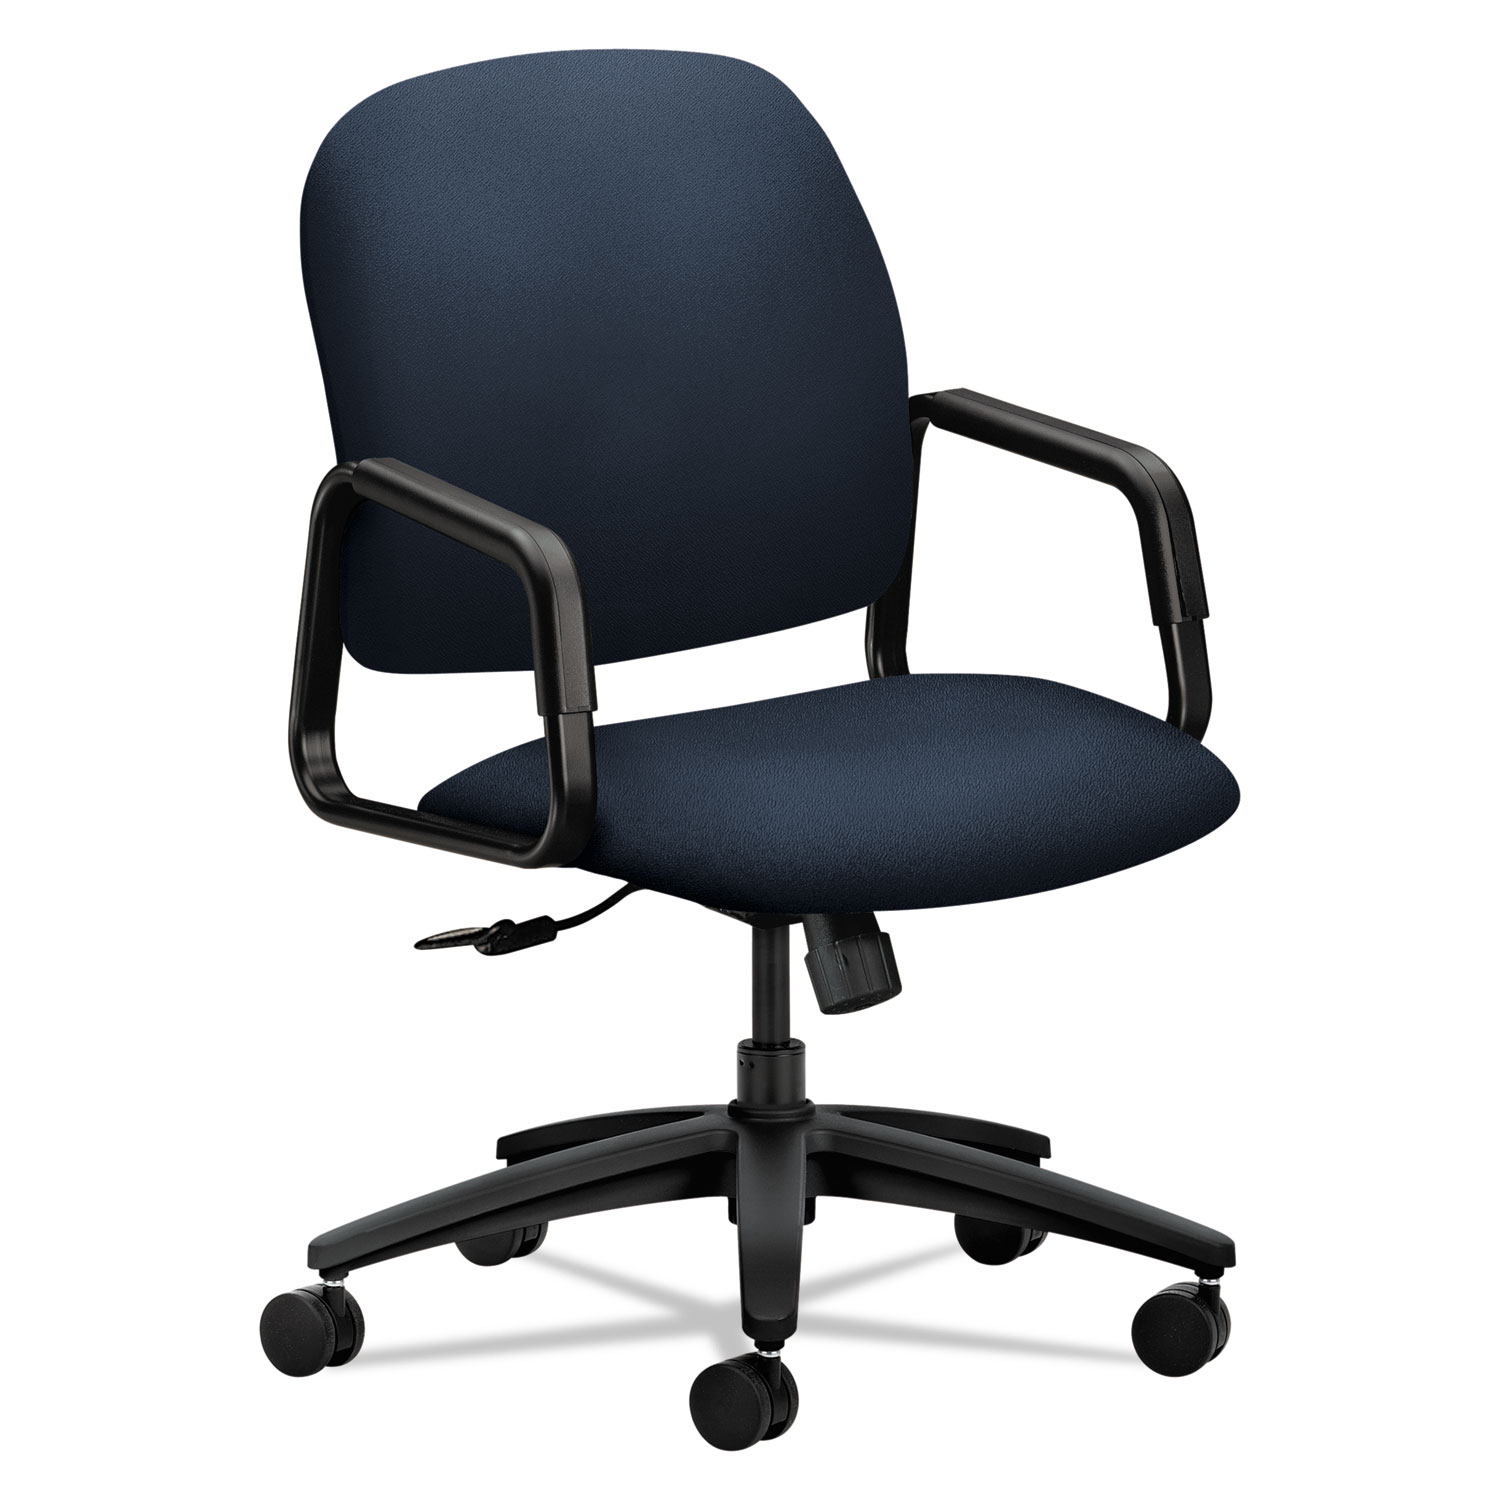  HON H4001.H.CU98.T Solutions Seating 4000 Series Executive High-Back Chair, Supports up to 250 lbs., Navy Seat, Navy Back, Black Base (HON4001CU98T) 